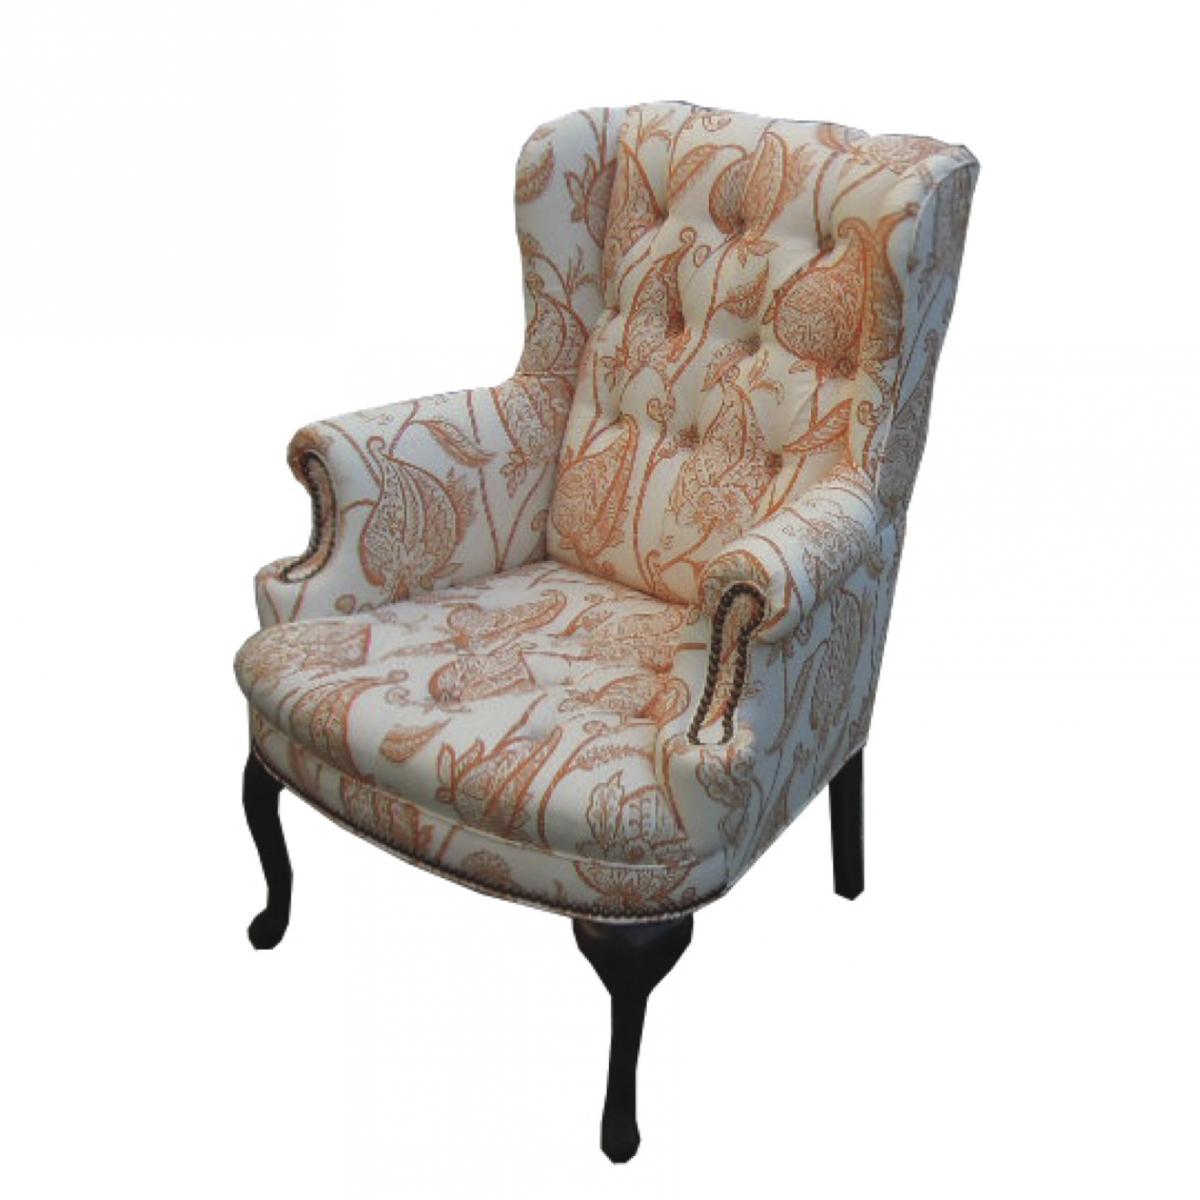 Reupholstered wing chair with tufting in white and orange fabric